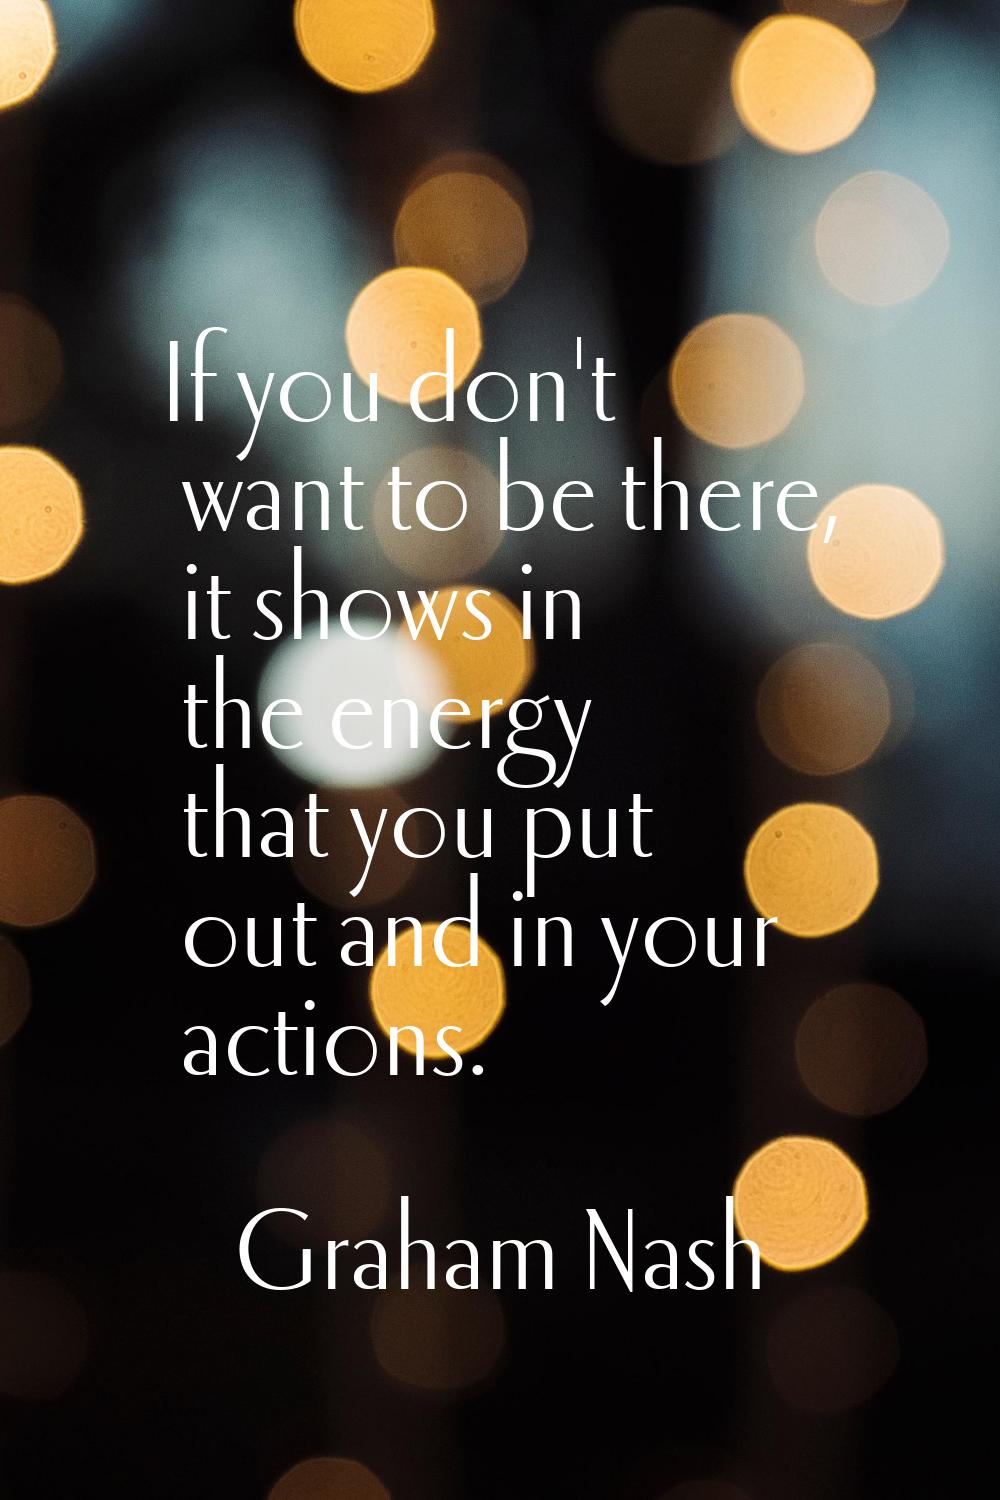 If you don't want to be there, it shows in the energy that you put out and in your actions.